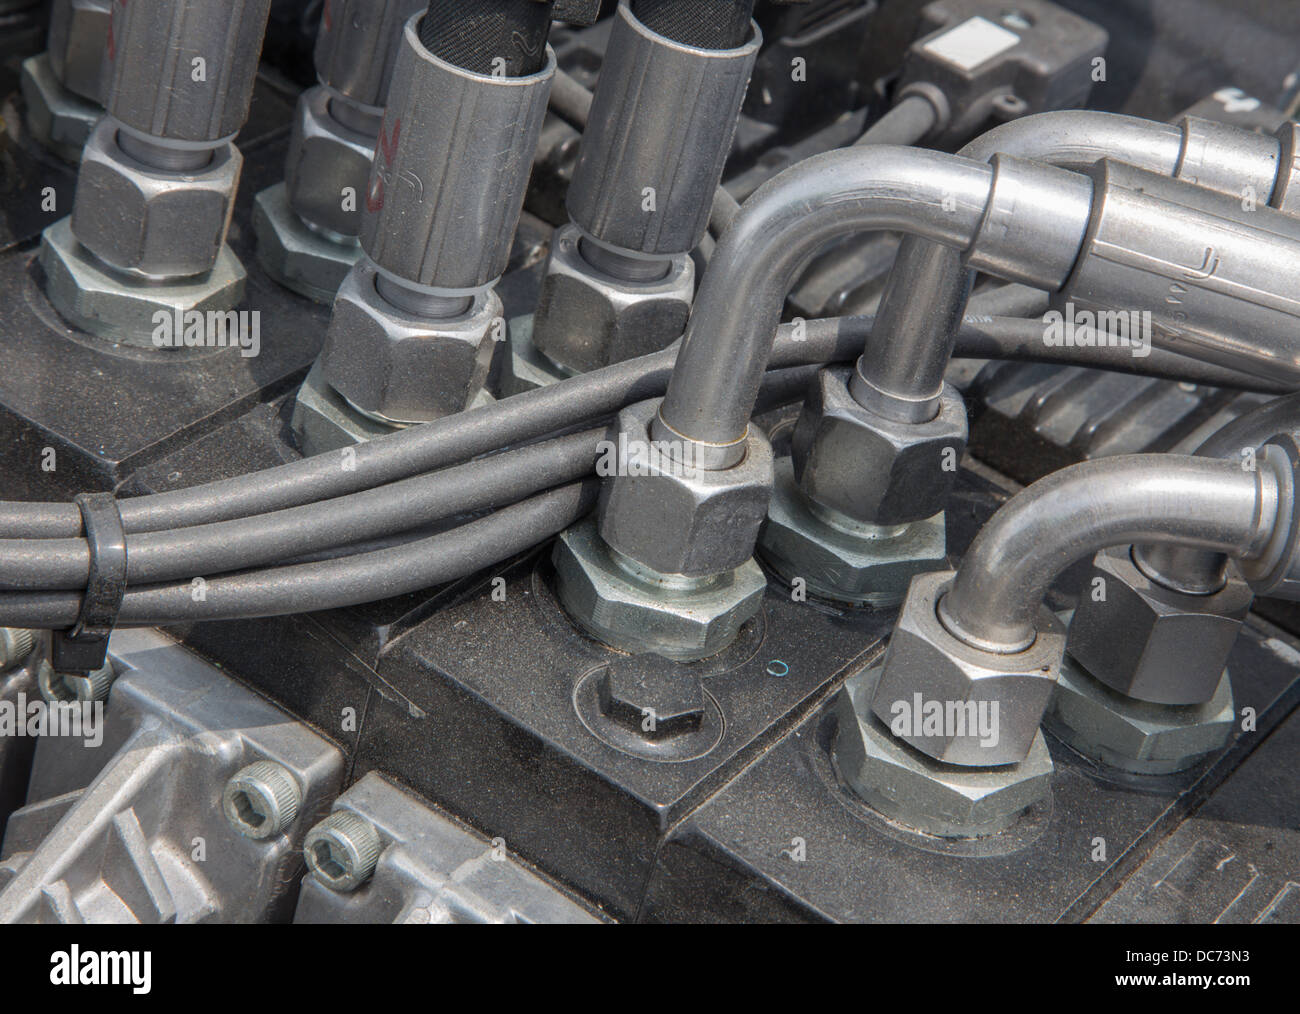 detail of hydraulic of excavator Stock Photo